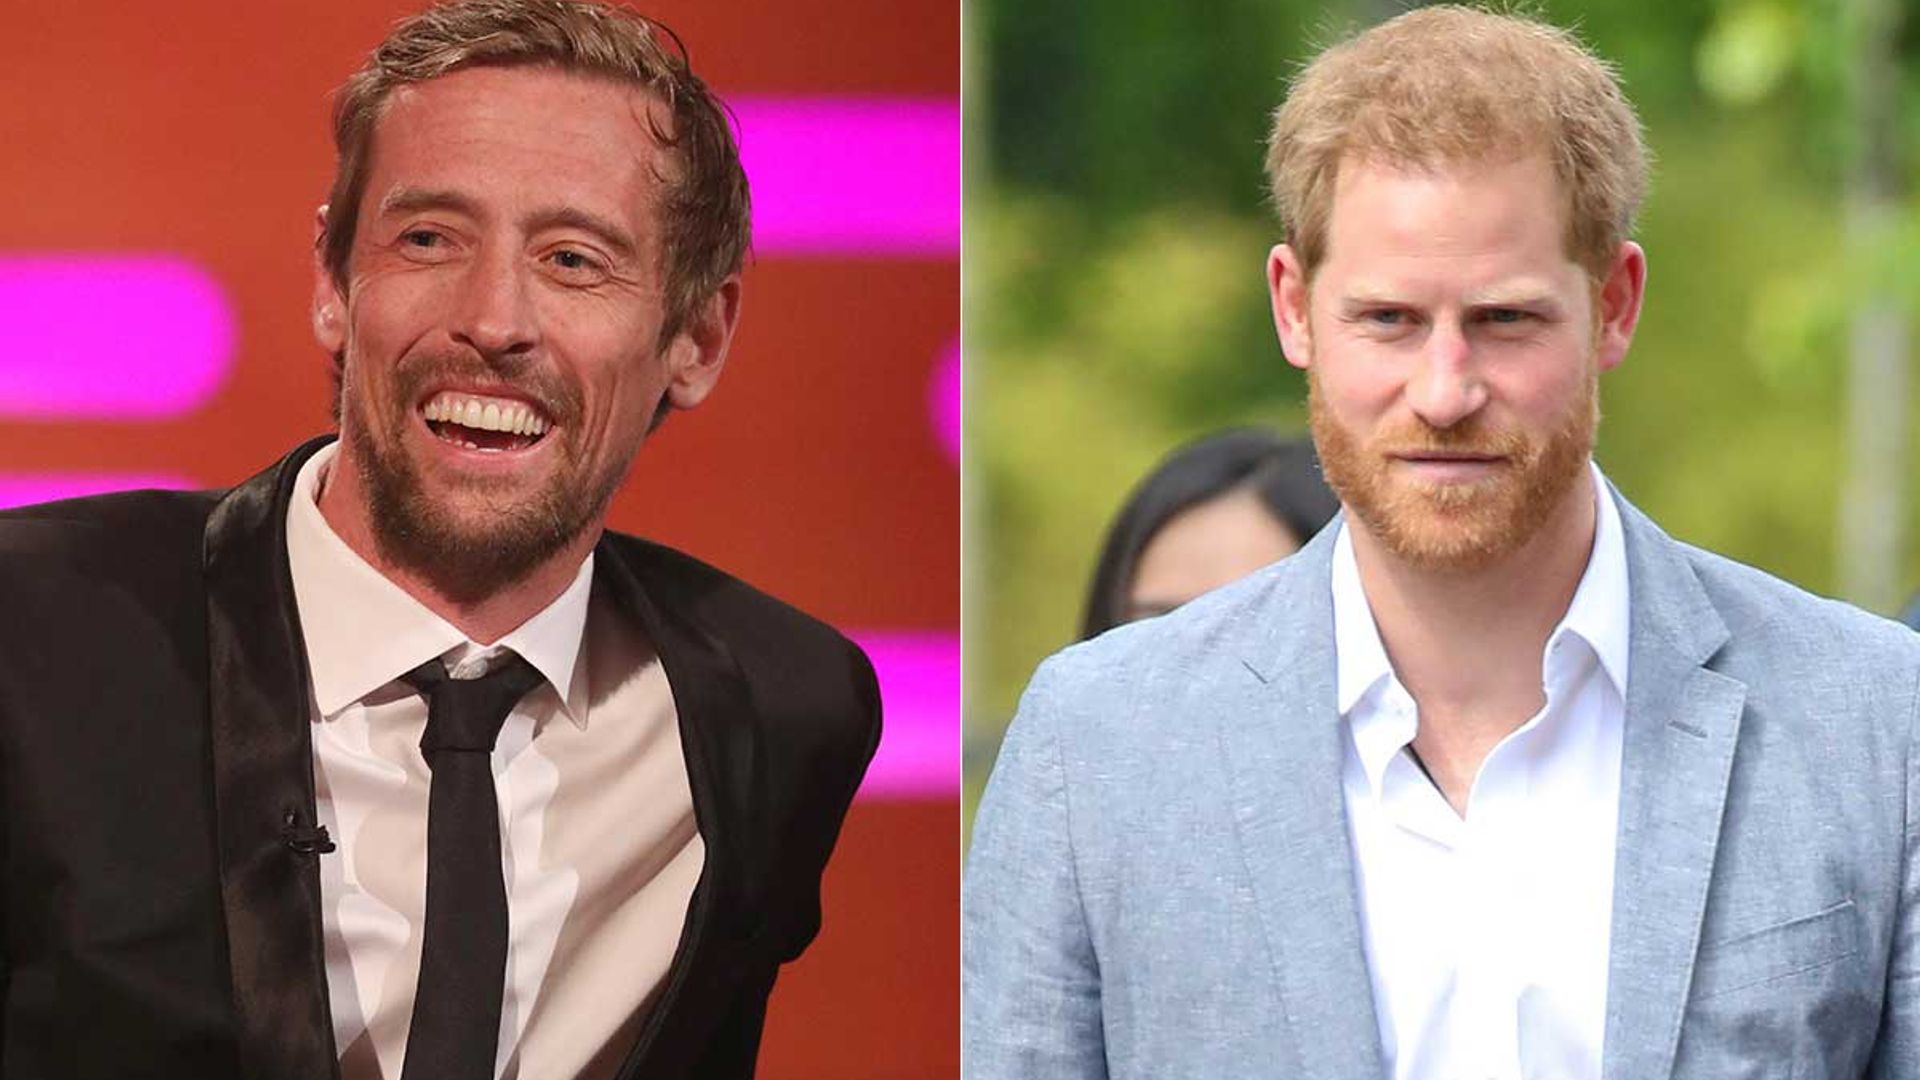 Peter Crouch wished he said this to Prince Harry after his cheeky Abbey Clancy jibe